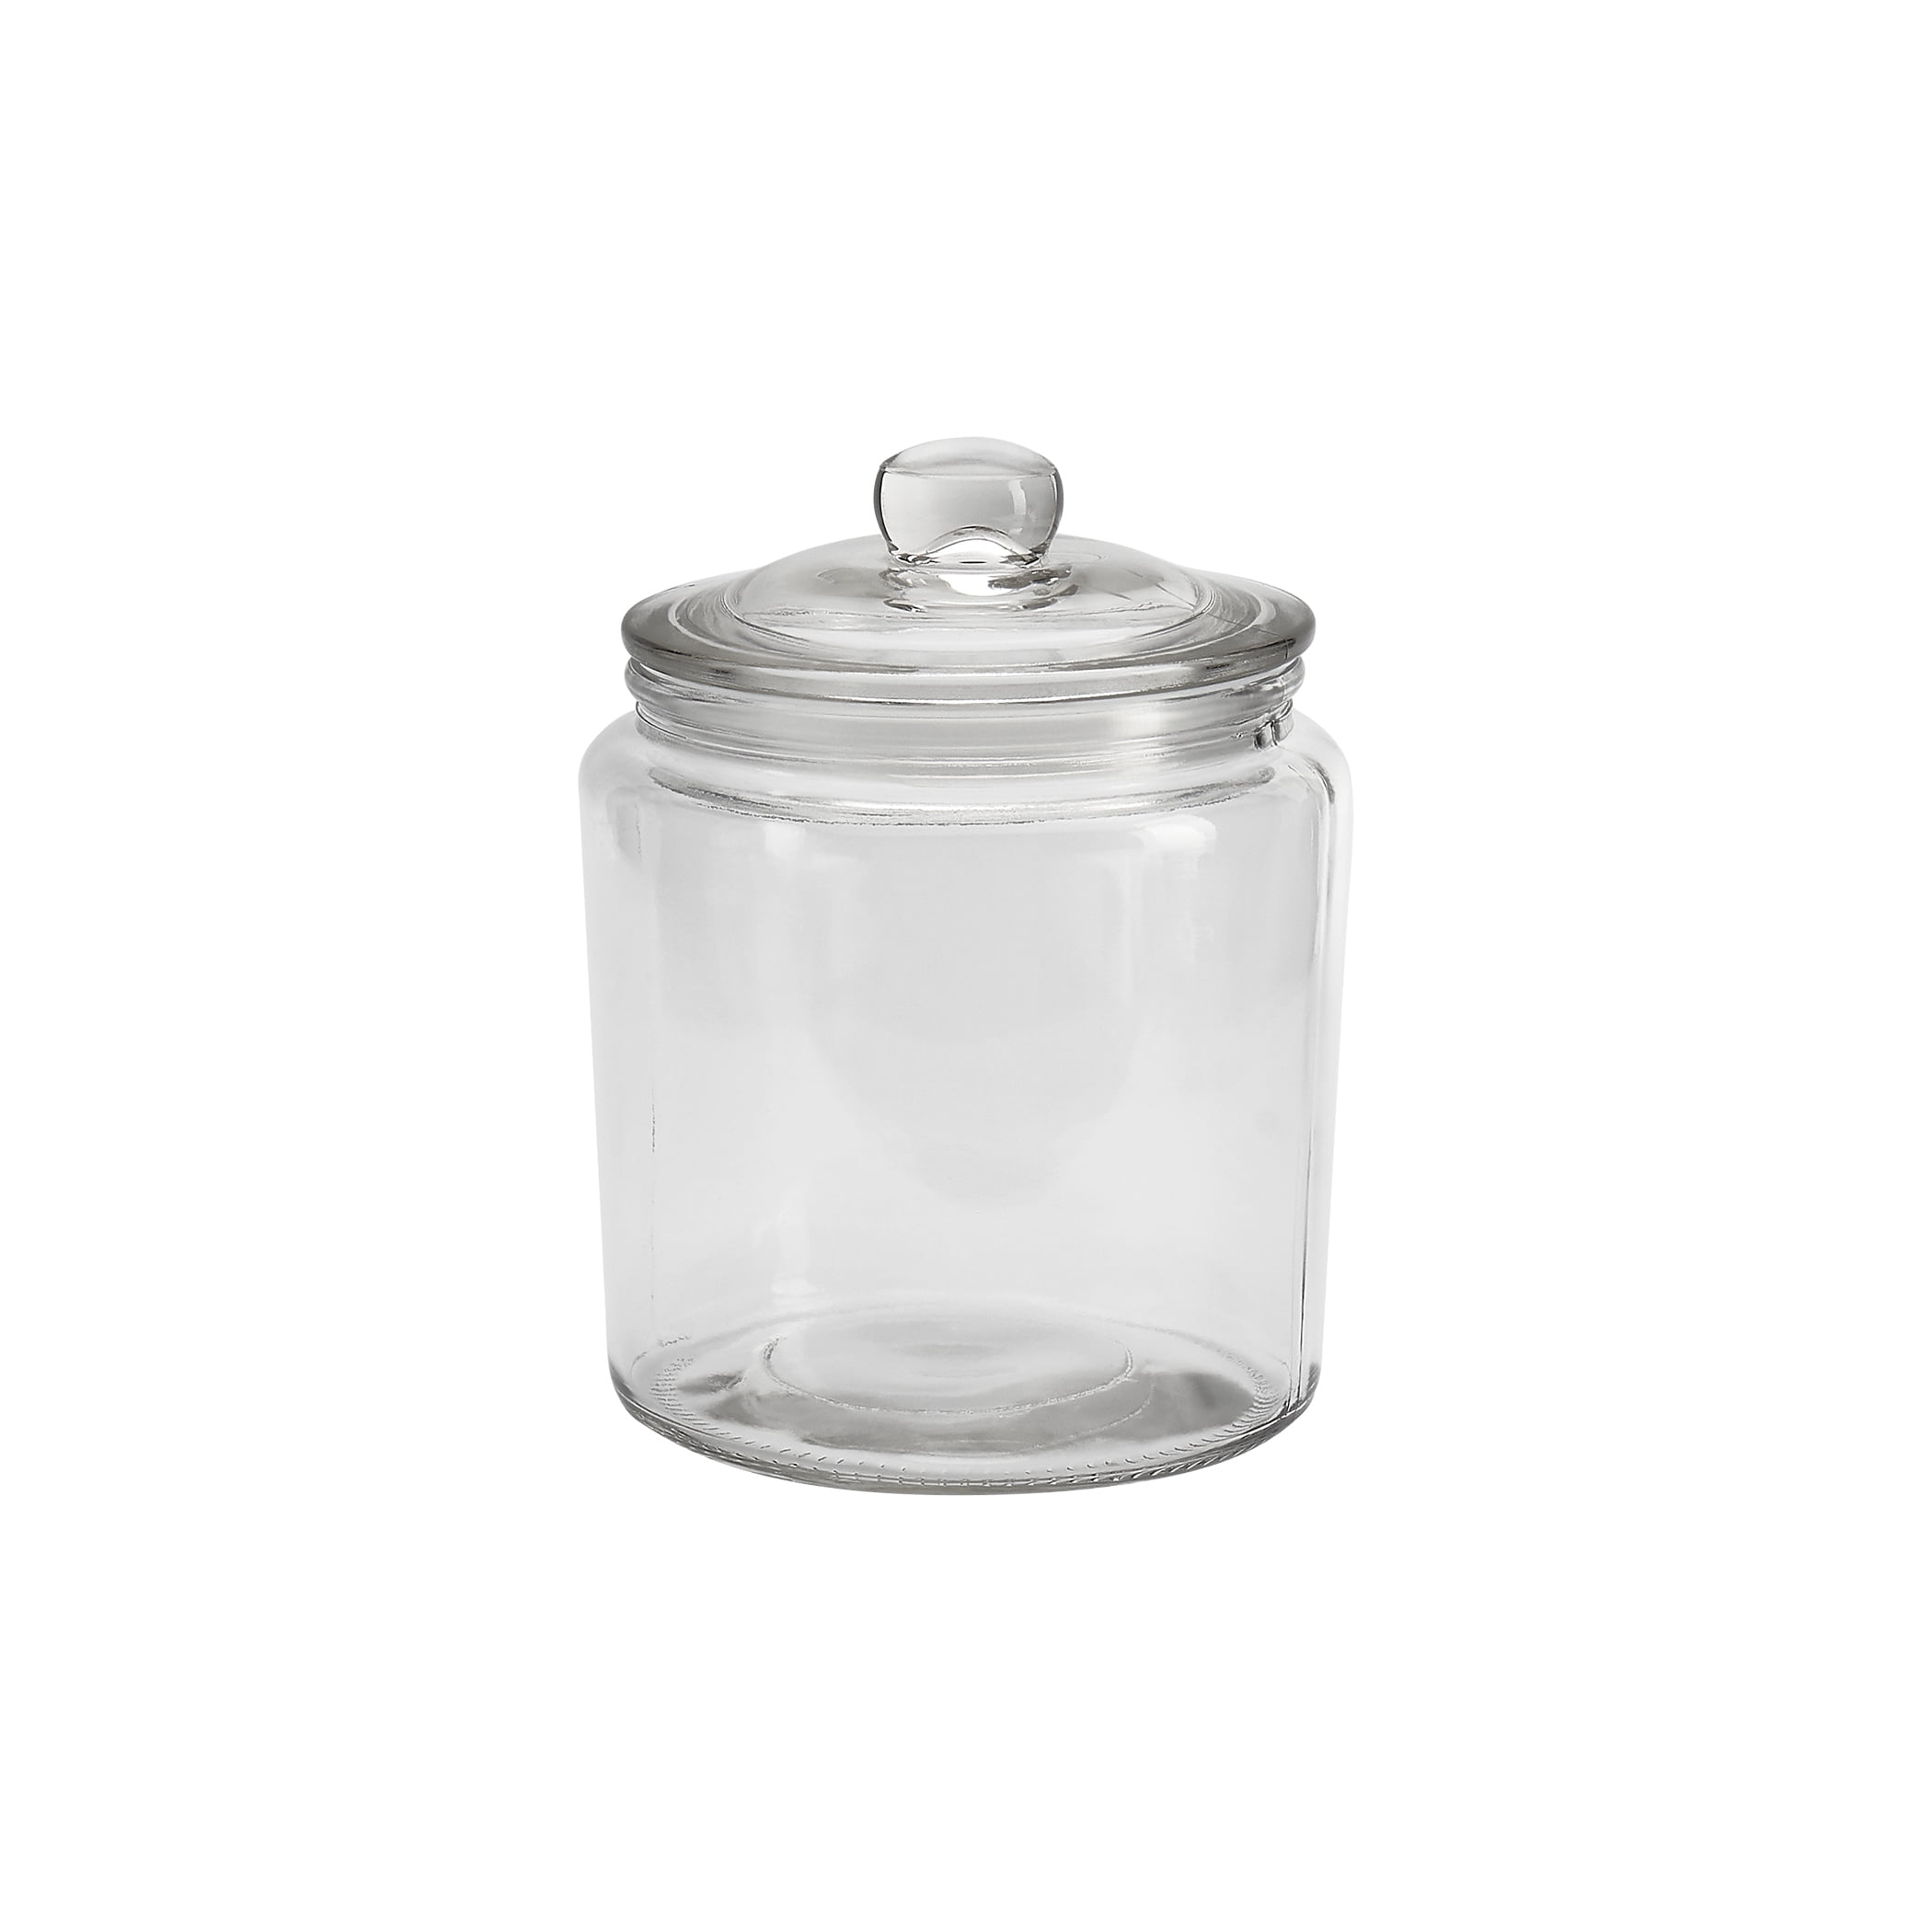 20 oz. Thick Elevation Apothecary Jars with Flat Glass Lids per dozen